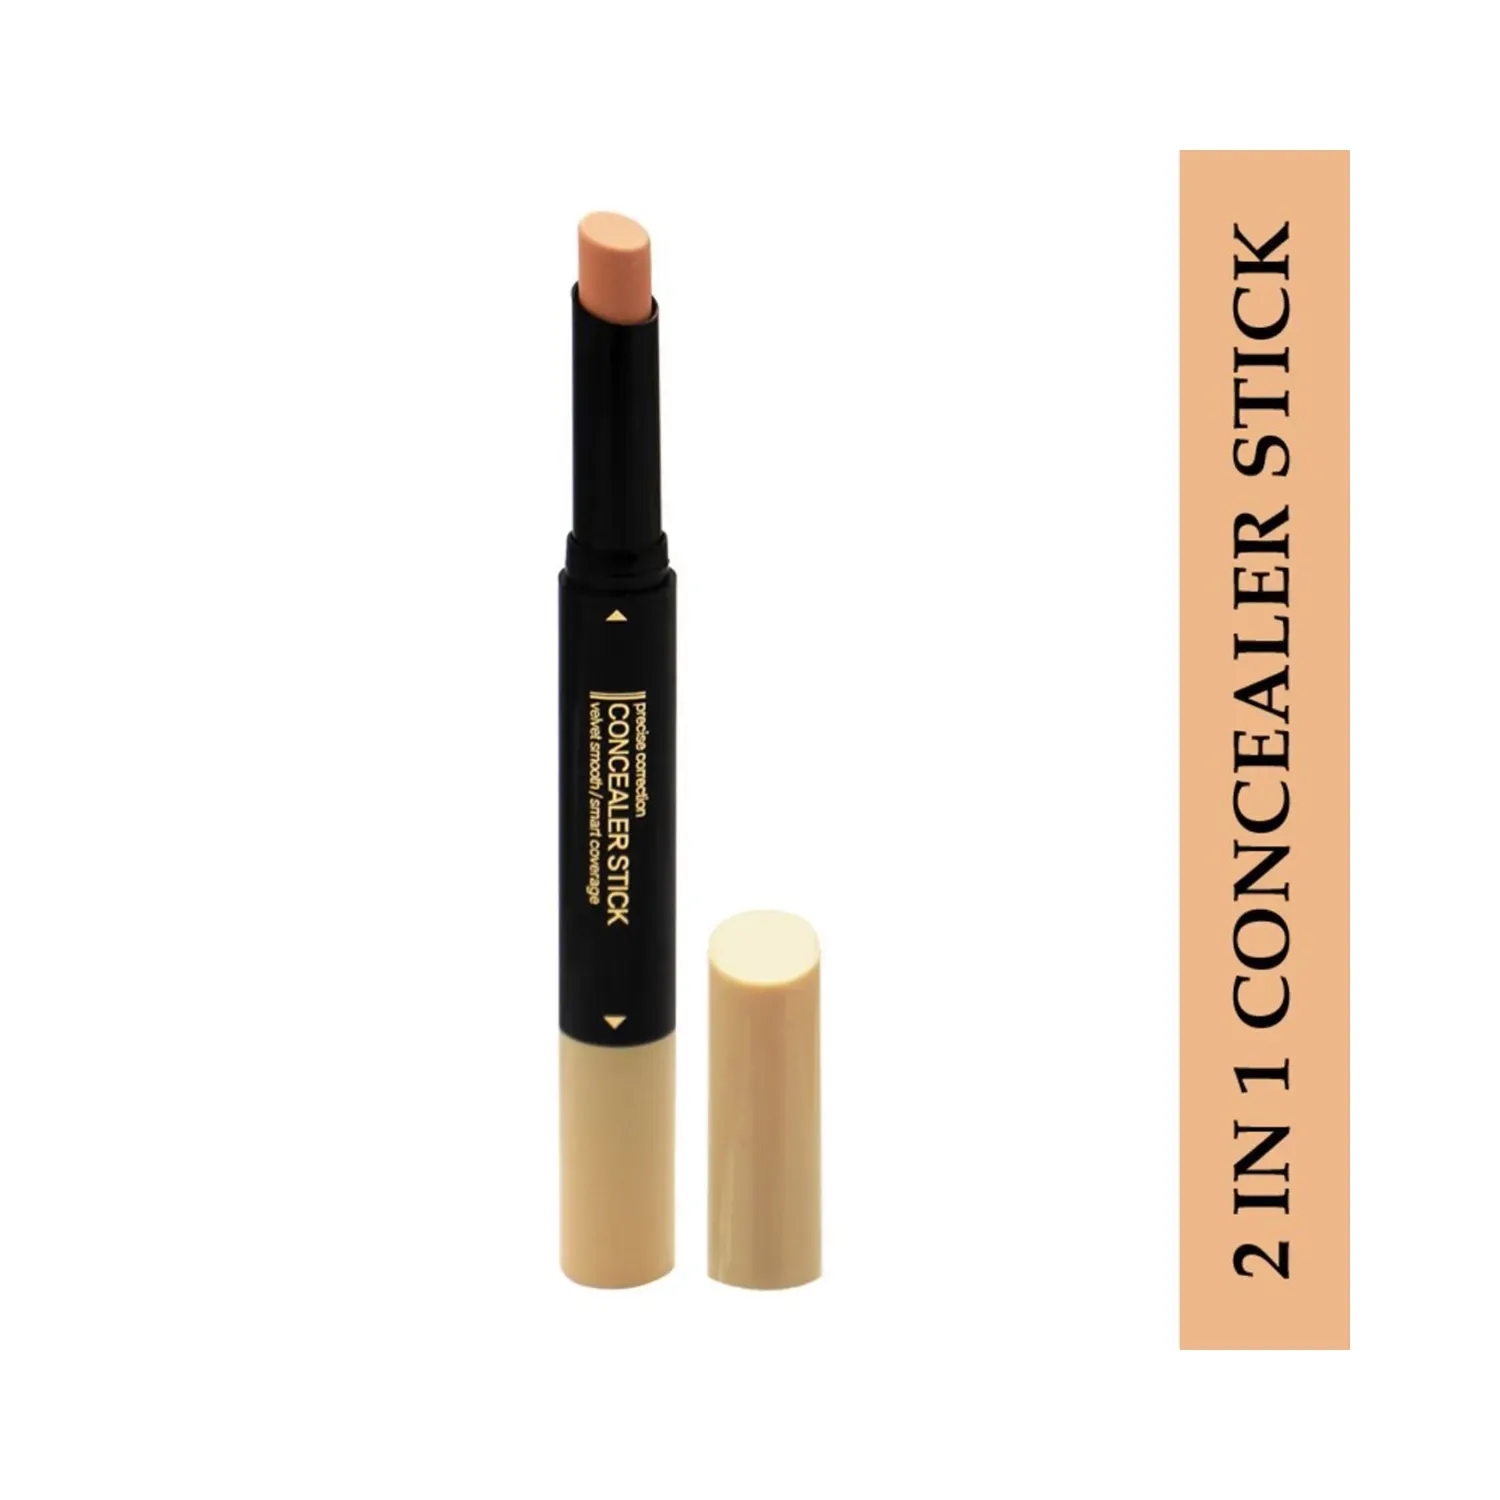 Fashion Colour | Fashion Colour Jersy Girl 2-In-1 Double Perfecting Correction Concealer Stick - 03 Shade (2.2g)